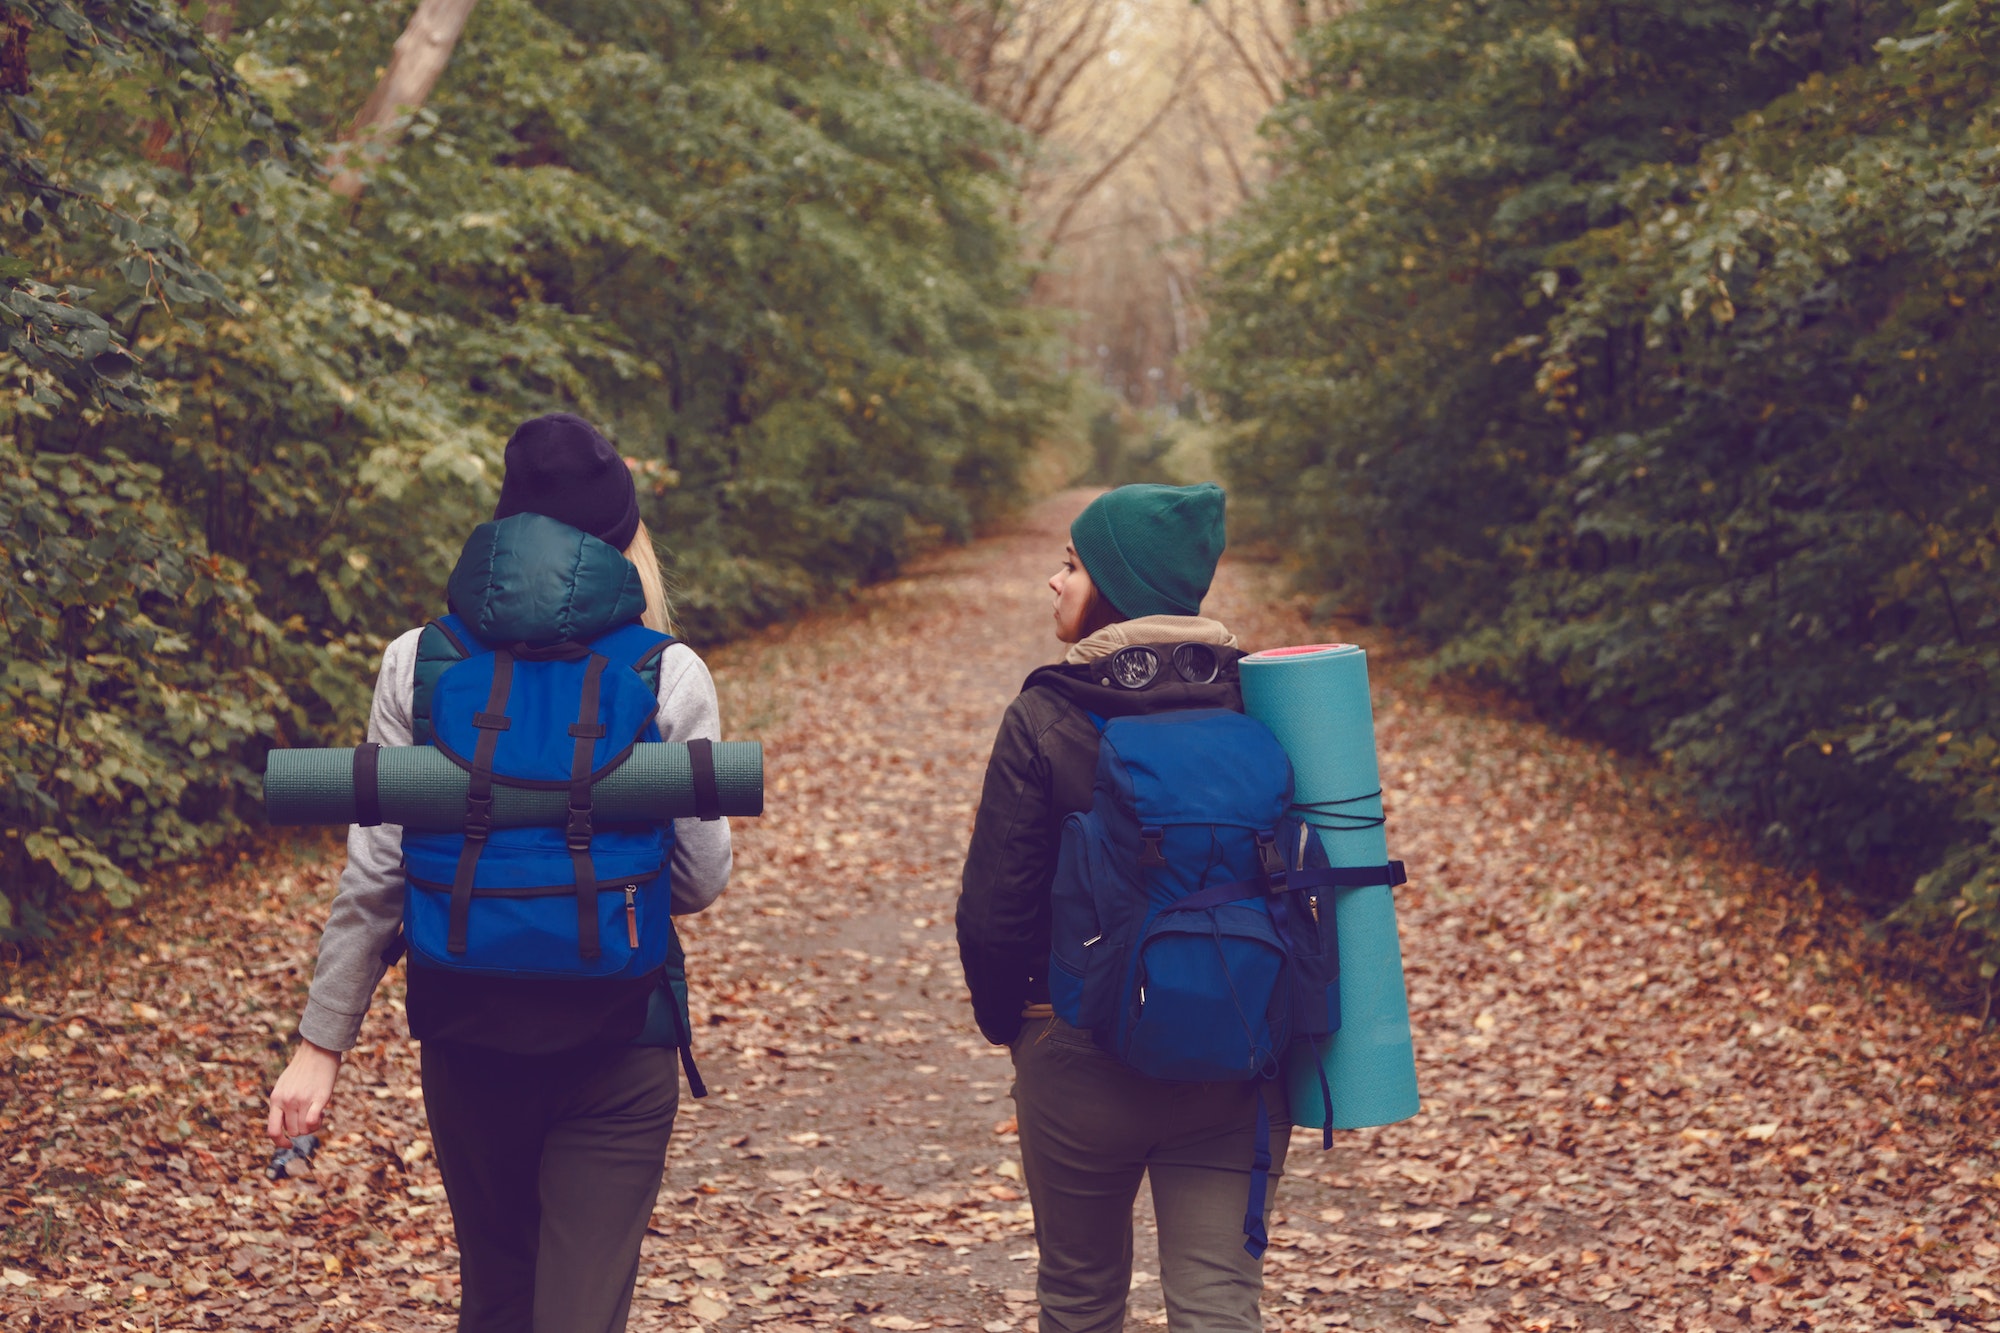 girlfriend traveler with backpacks went hiking in the woods